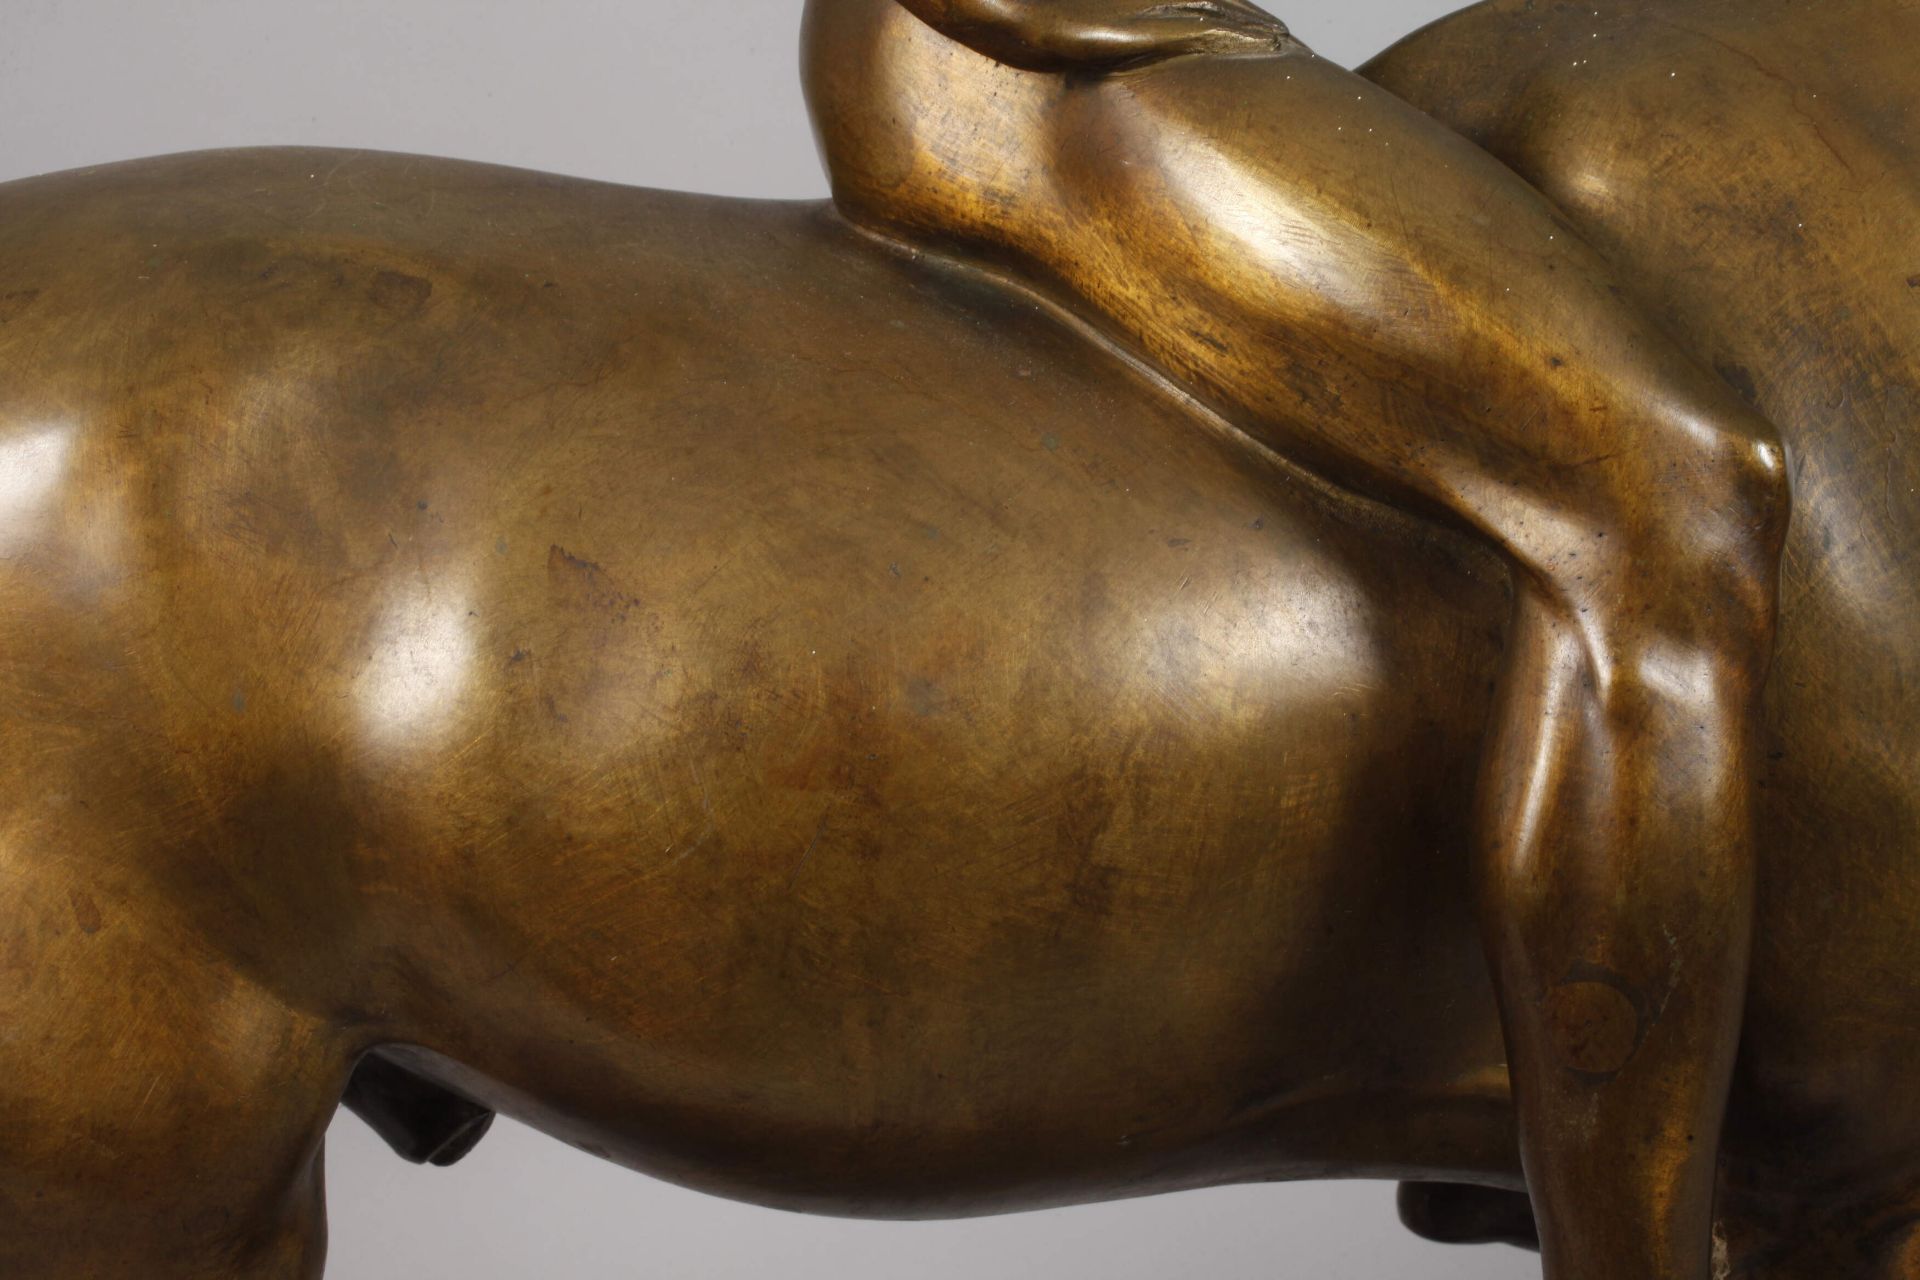 August Waterbeck, Large equestrian sculpture - Image 3 of 10